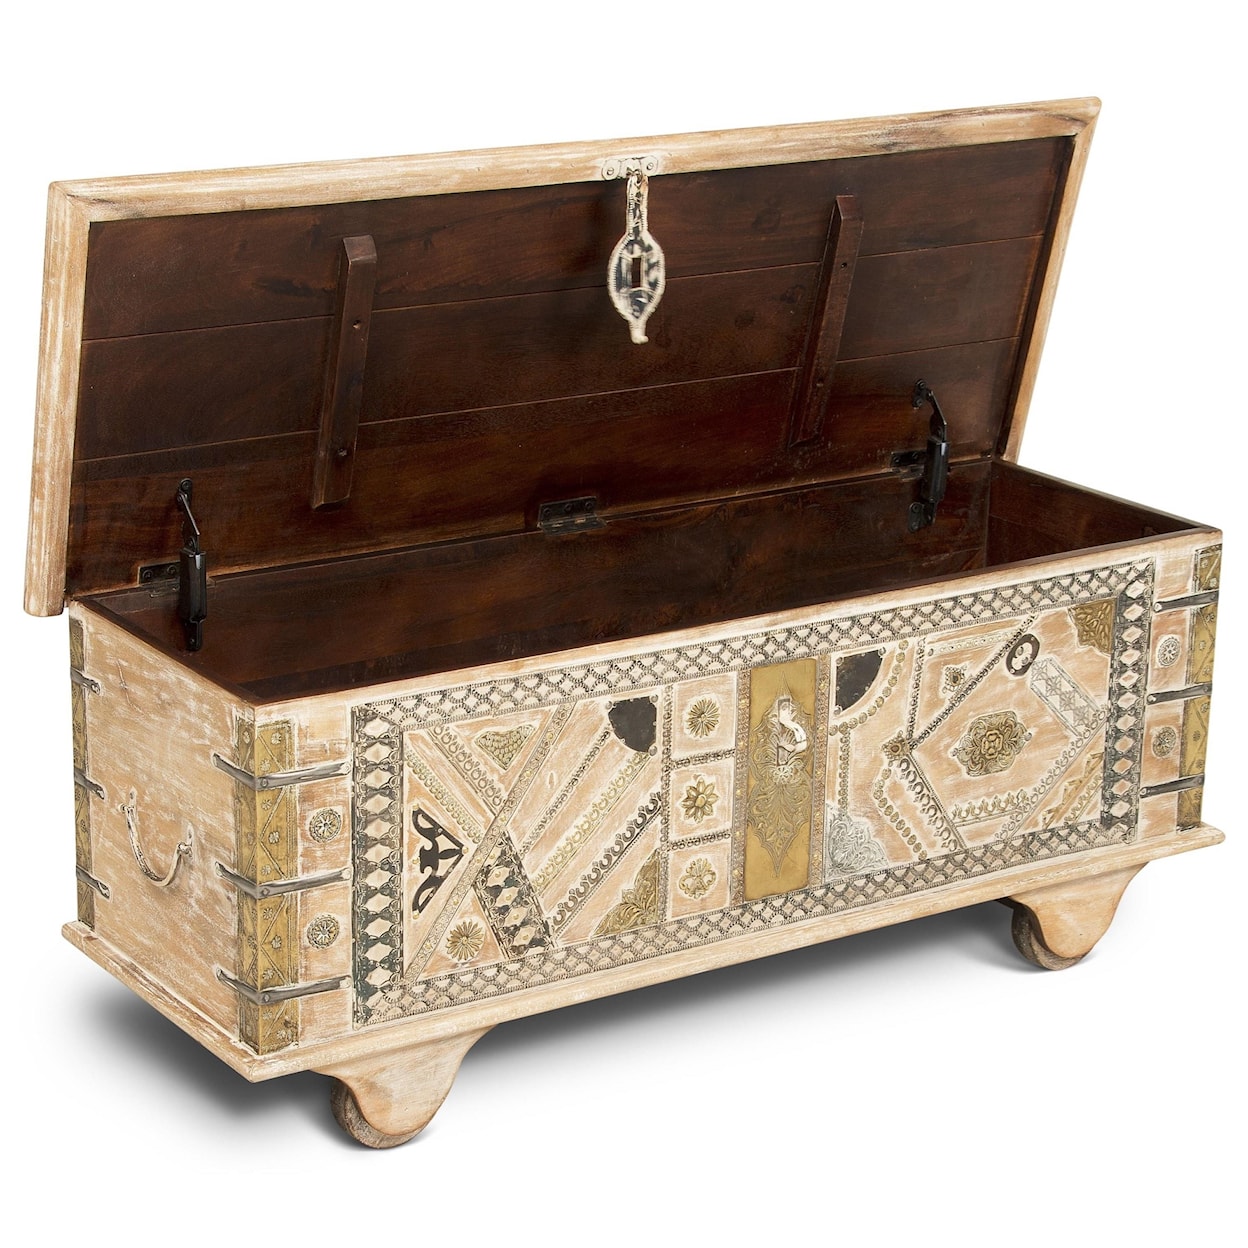 Steve Silver India Accents Amira Storage Trunk